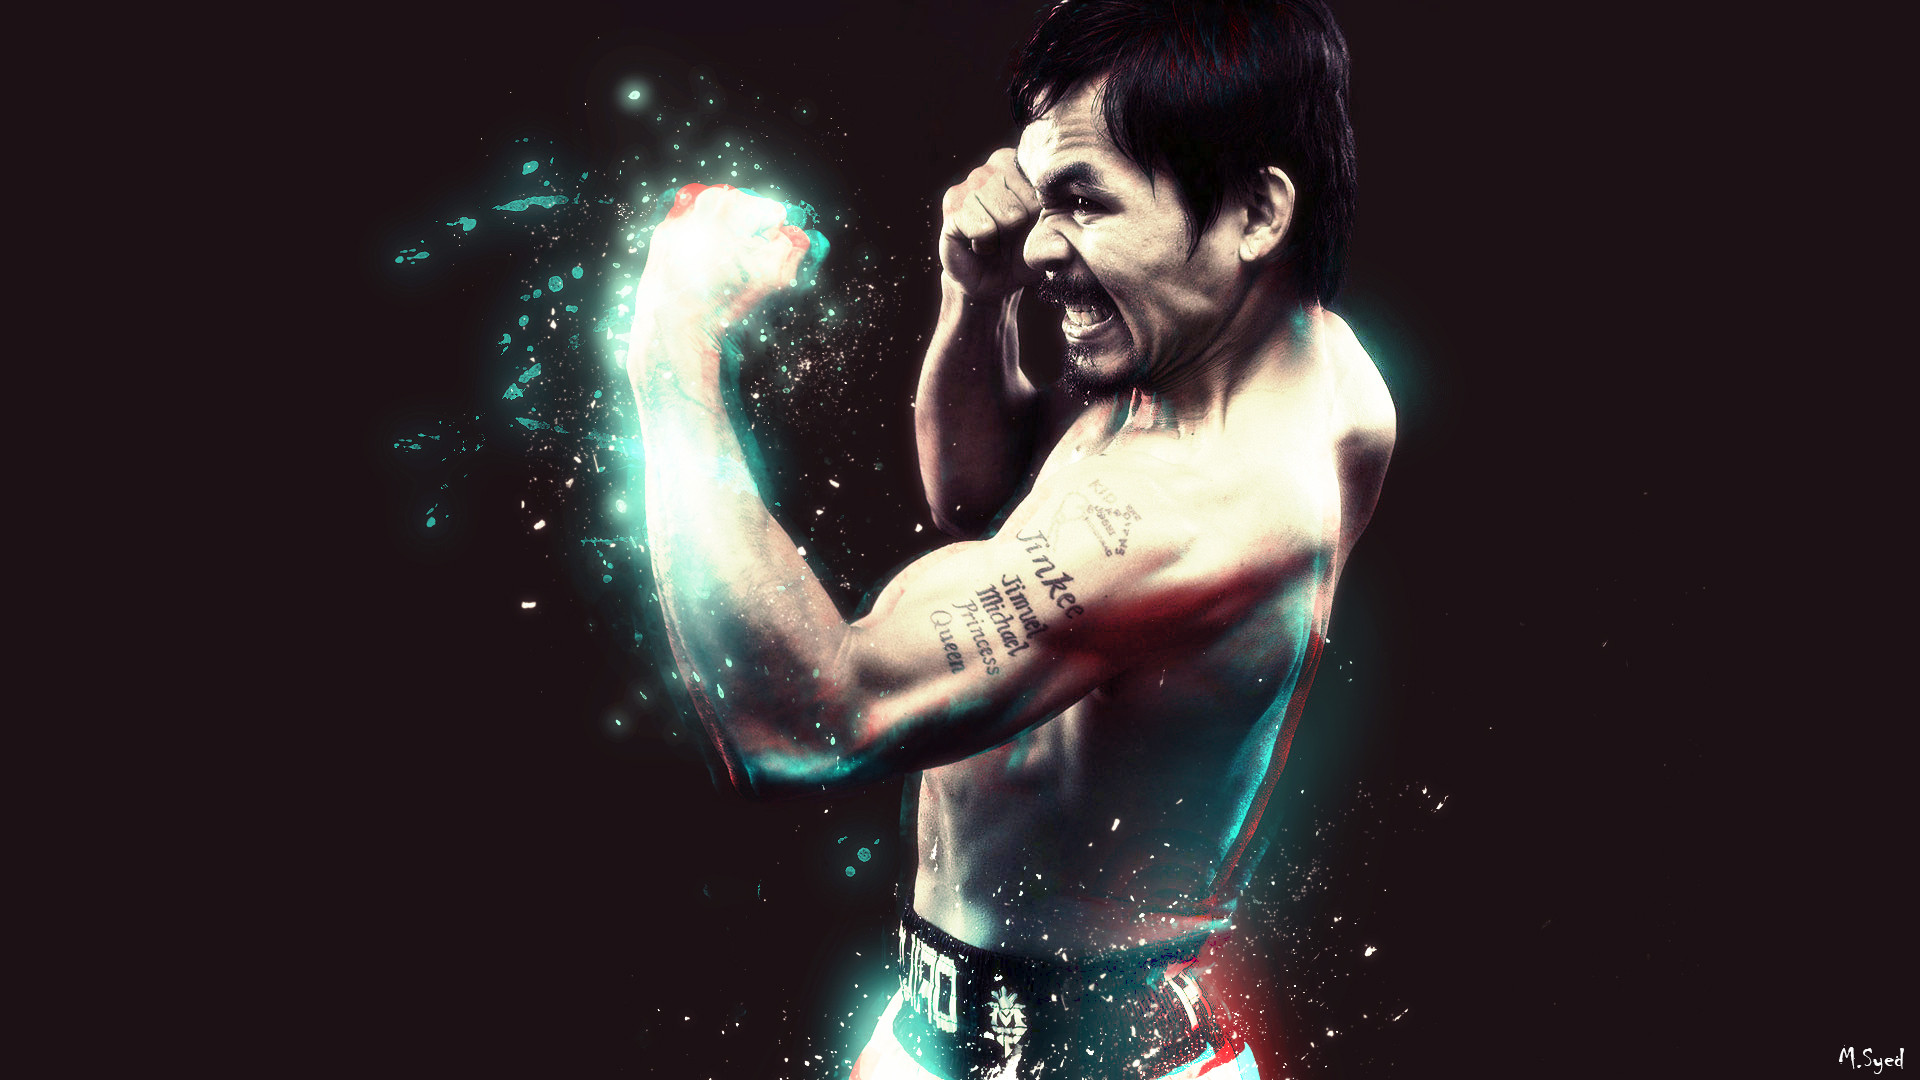 Manny Pacquiao Wallpaper 8y21ym2 Wallpaperexpert